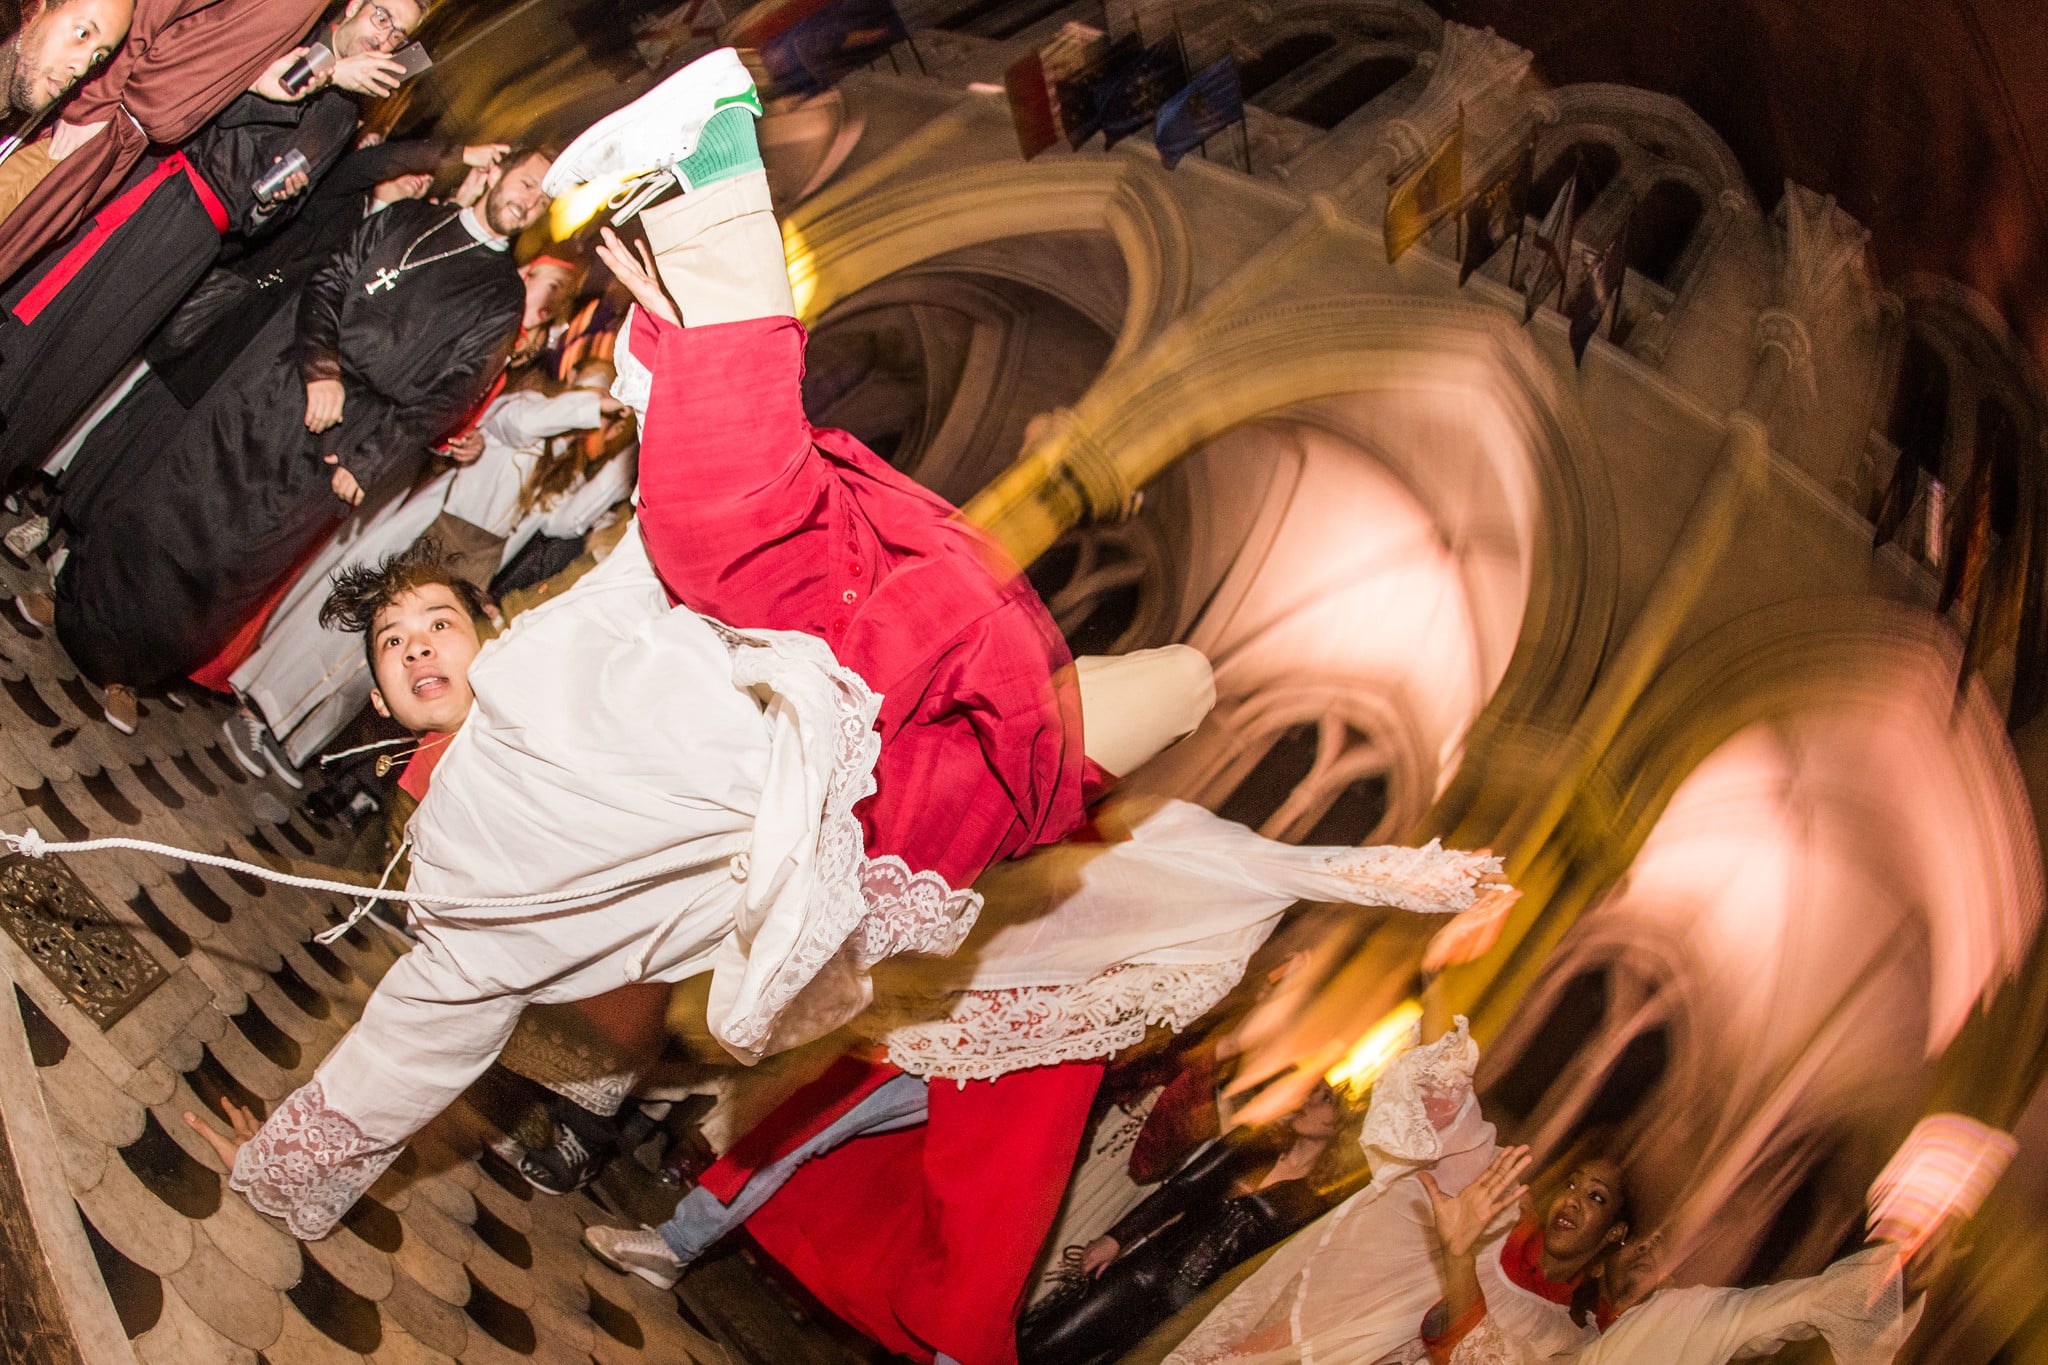 performance danse hip hop soiree costumee dans une eglise the last monastery cathedrale americaine de paris 5 ans wato agence wato we are the oracle agence evenementielle events event